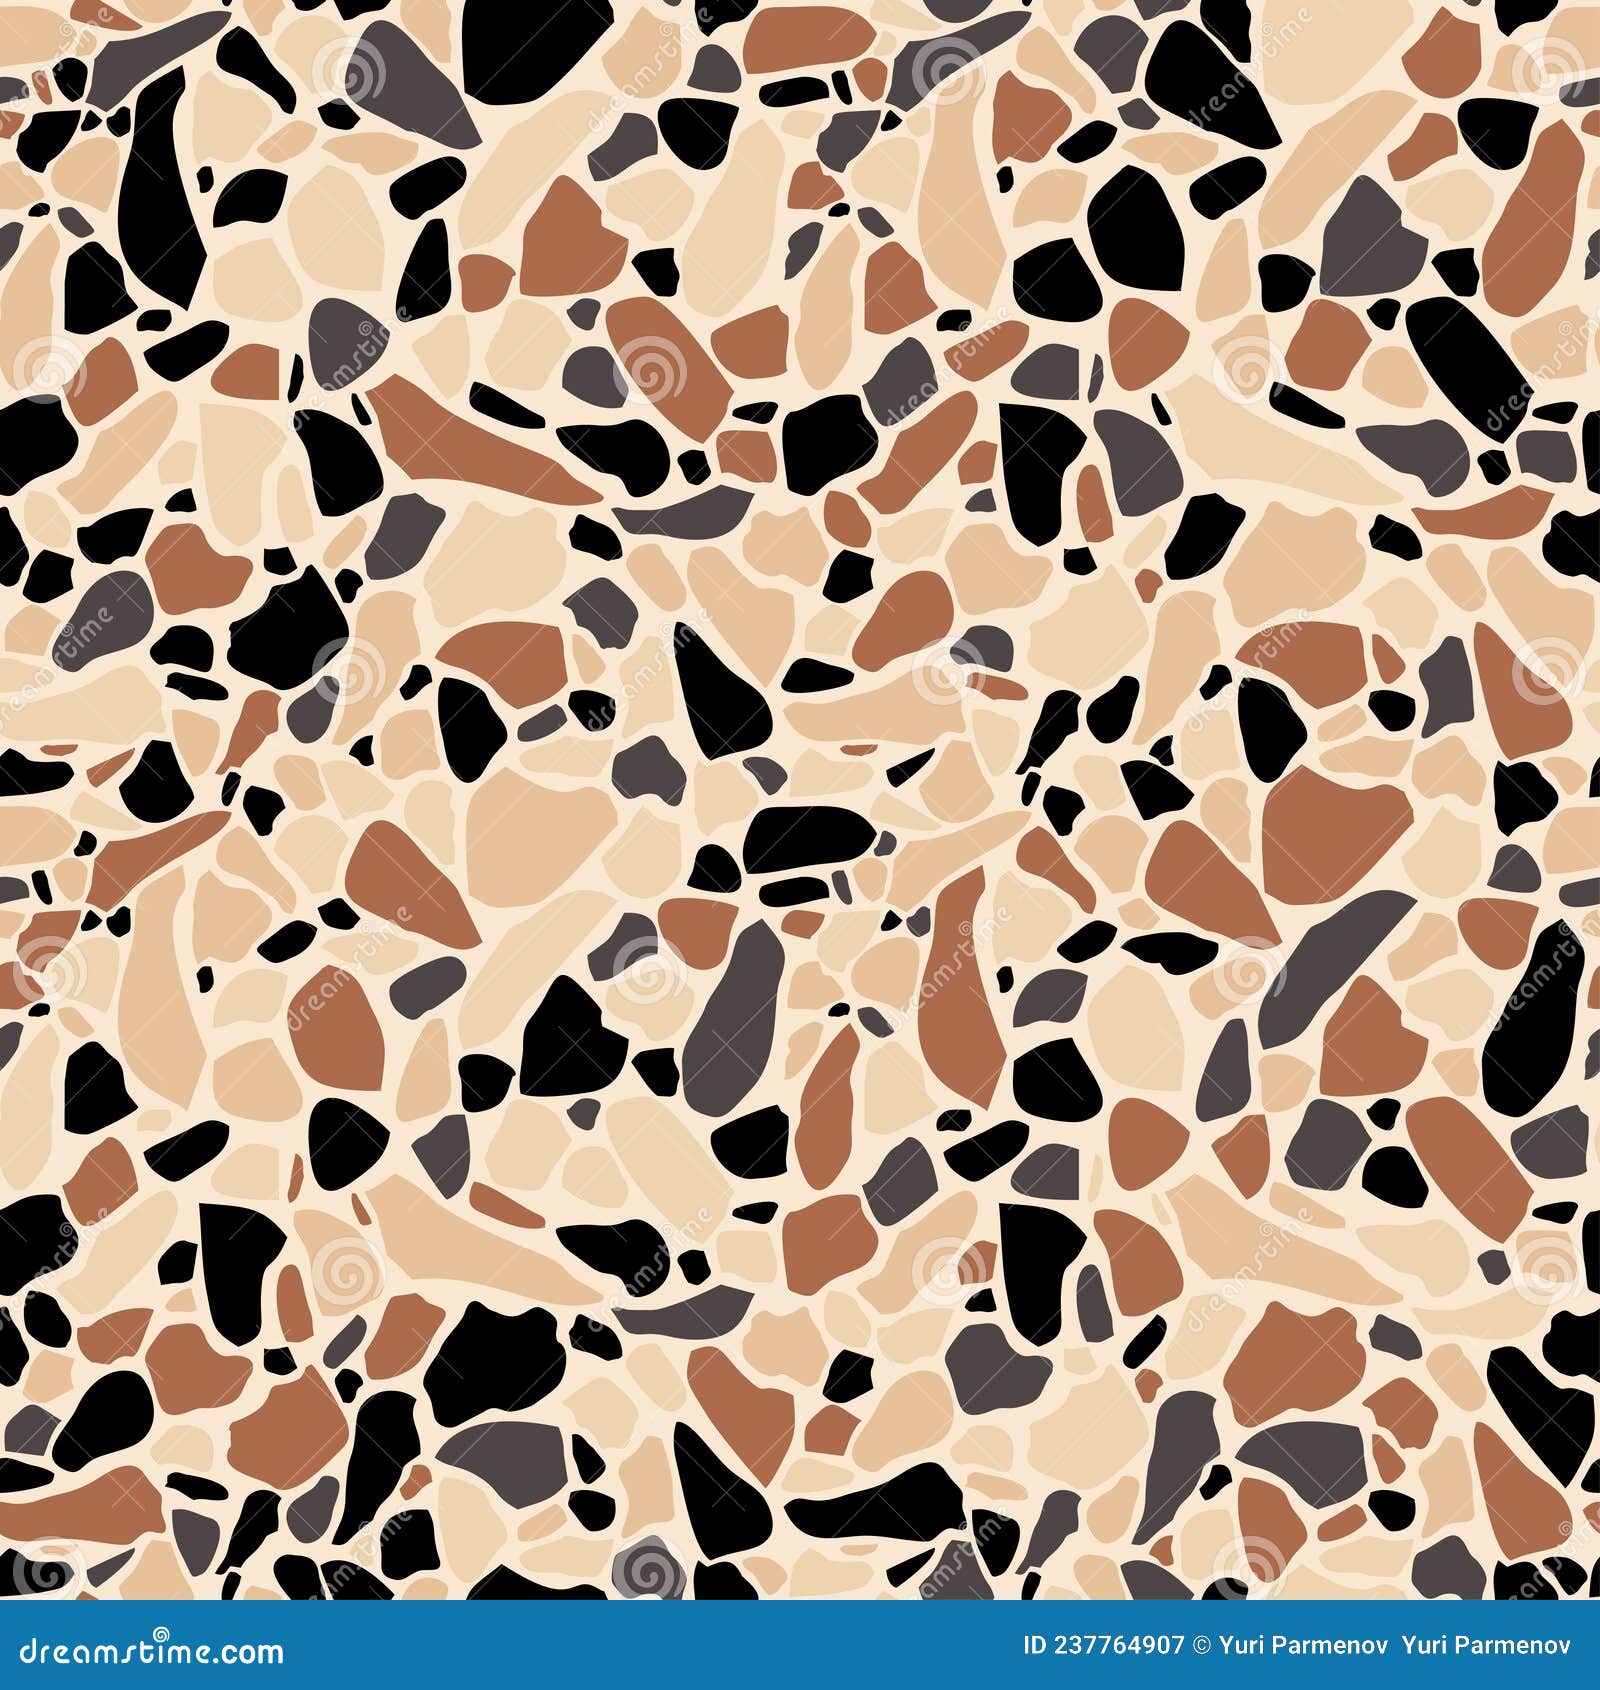 terrazzo texture. encaustic tiles flooring material. granito mosaics with chips of recycled glass, marble, stone. 